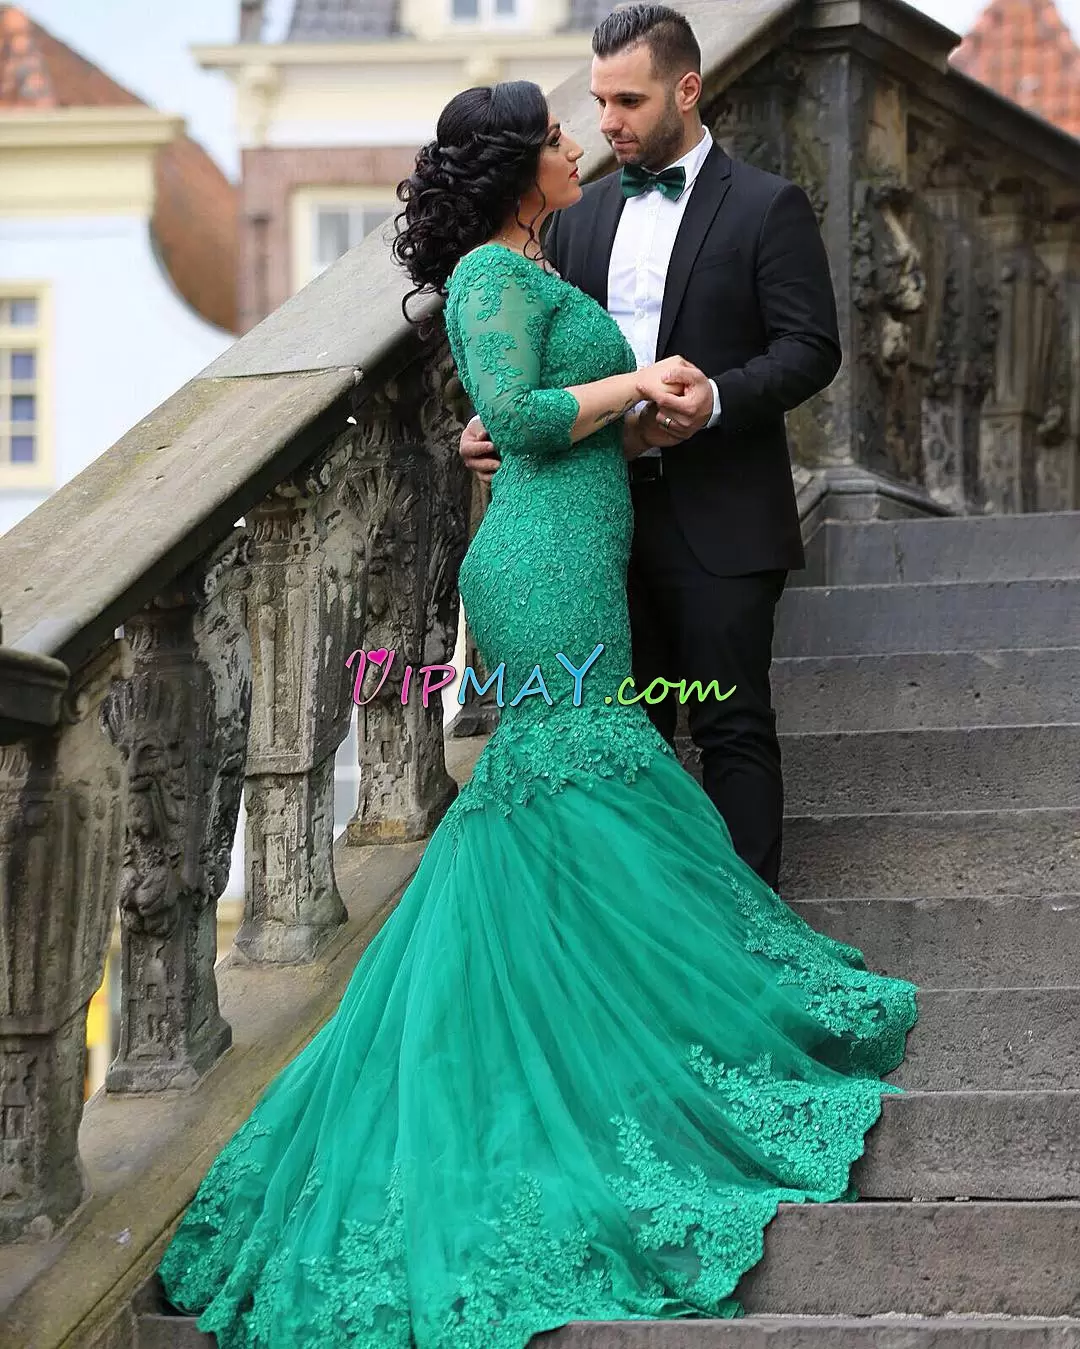 Emerald Green Mermaid V-neck 3 4 Length Sleeve Lace Prom Dress with Train